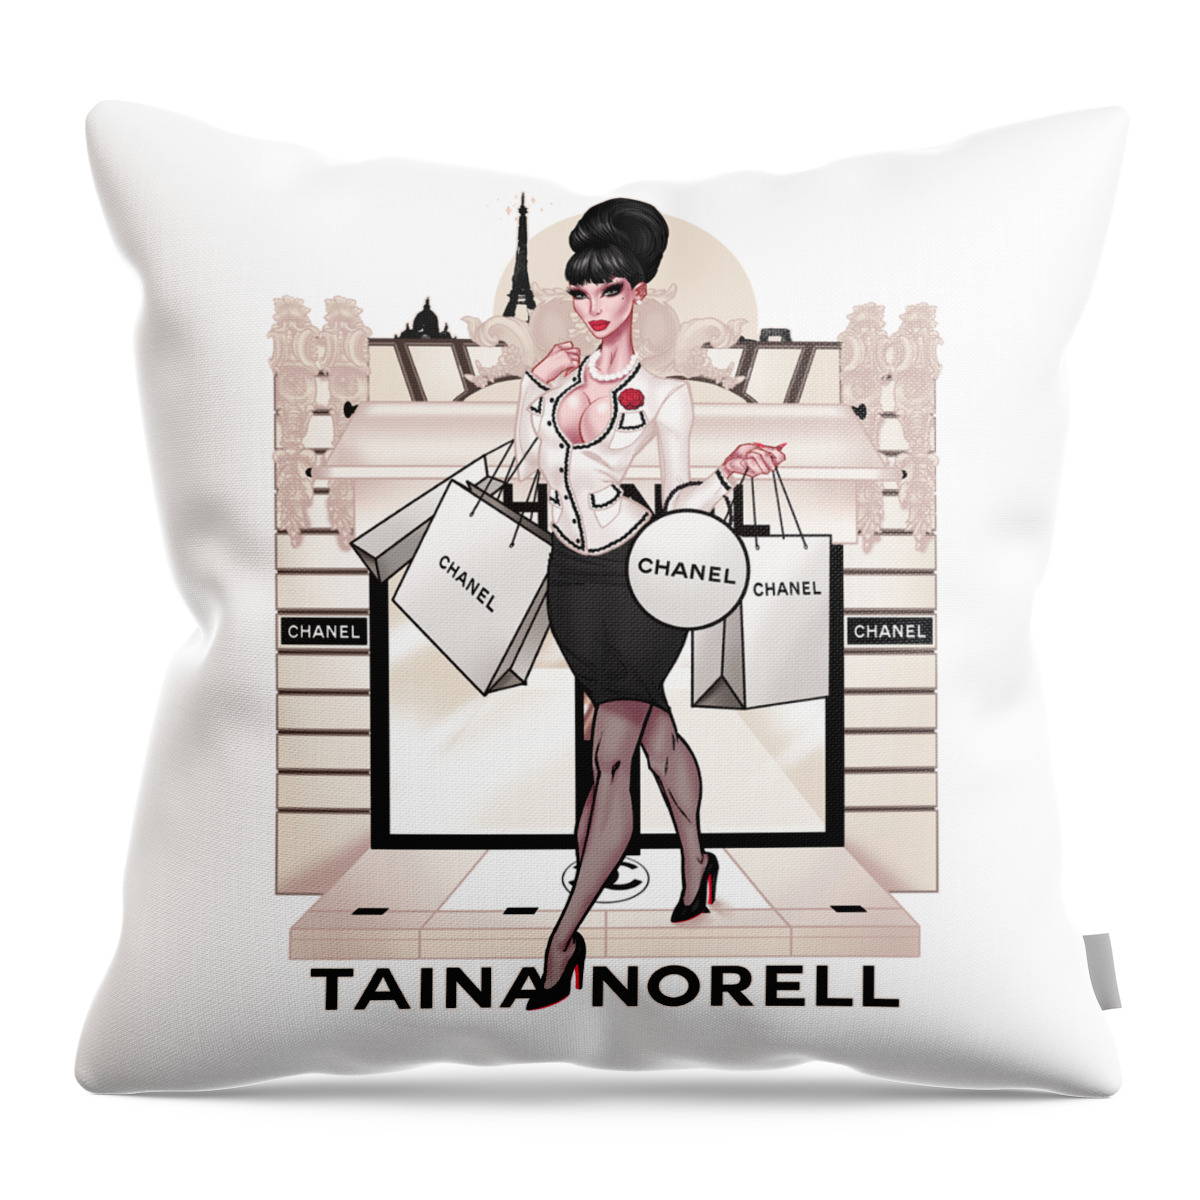 Magical Moments In Paris Pretty Woman Throw Pillow by Taina Norell - Pixels